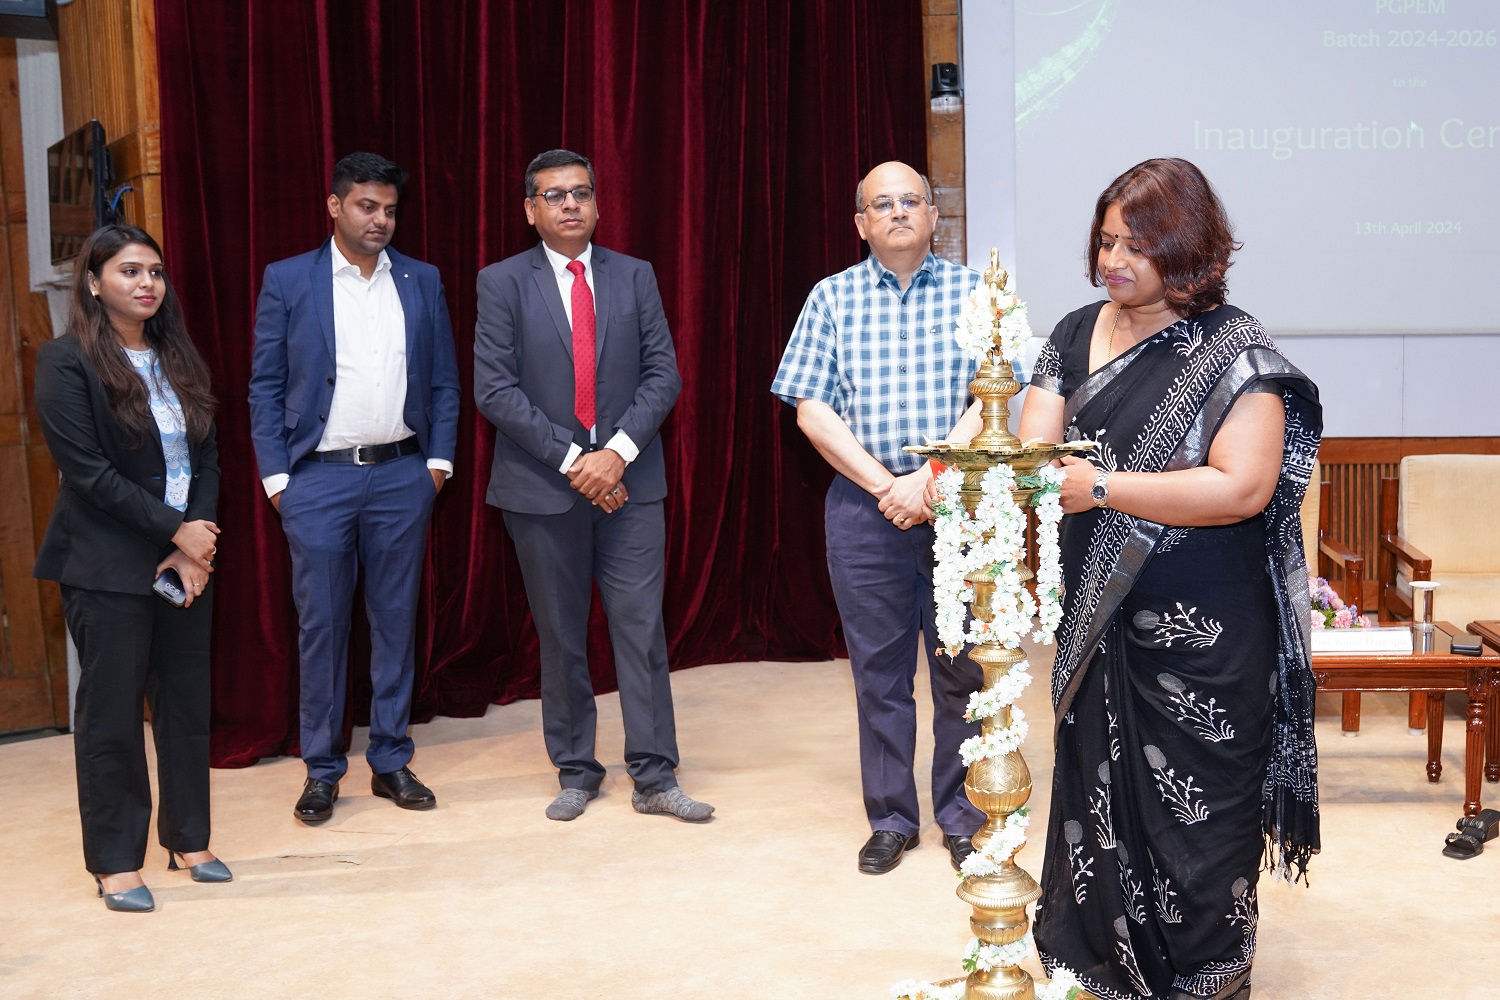 Chief Guests Mekhala Govinda, Services Director,  Dassault Systemes, lights the lamp at the inauguration of PGPEM Batch of  2024 – 2026. (L-R) representatives of the PGPEM batch of 2024-26, Chief Guest Jay Doshi Managing Director, Corporate Units, Digital, and India at BT Group, Prof. Rishikesha T Krishnan, Director, IIM Bangalore, looks on.